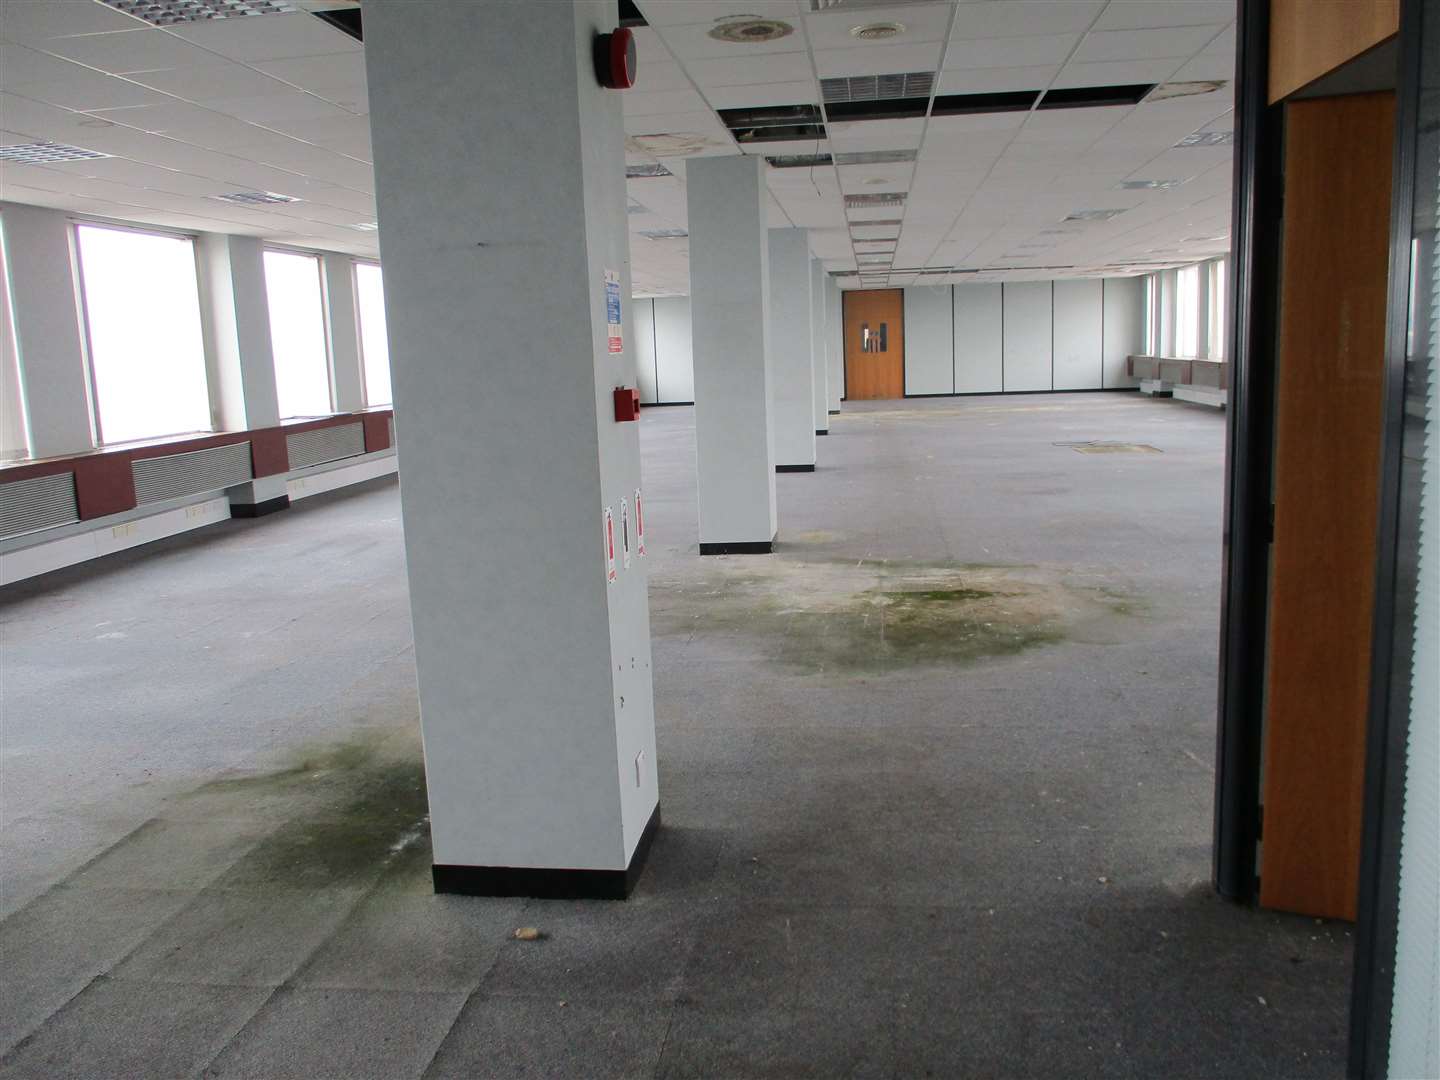 An office floor. Picture: Medway Council